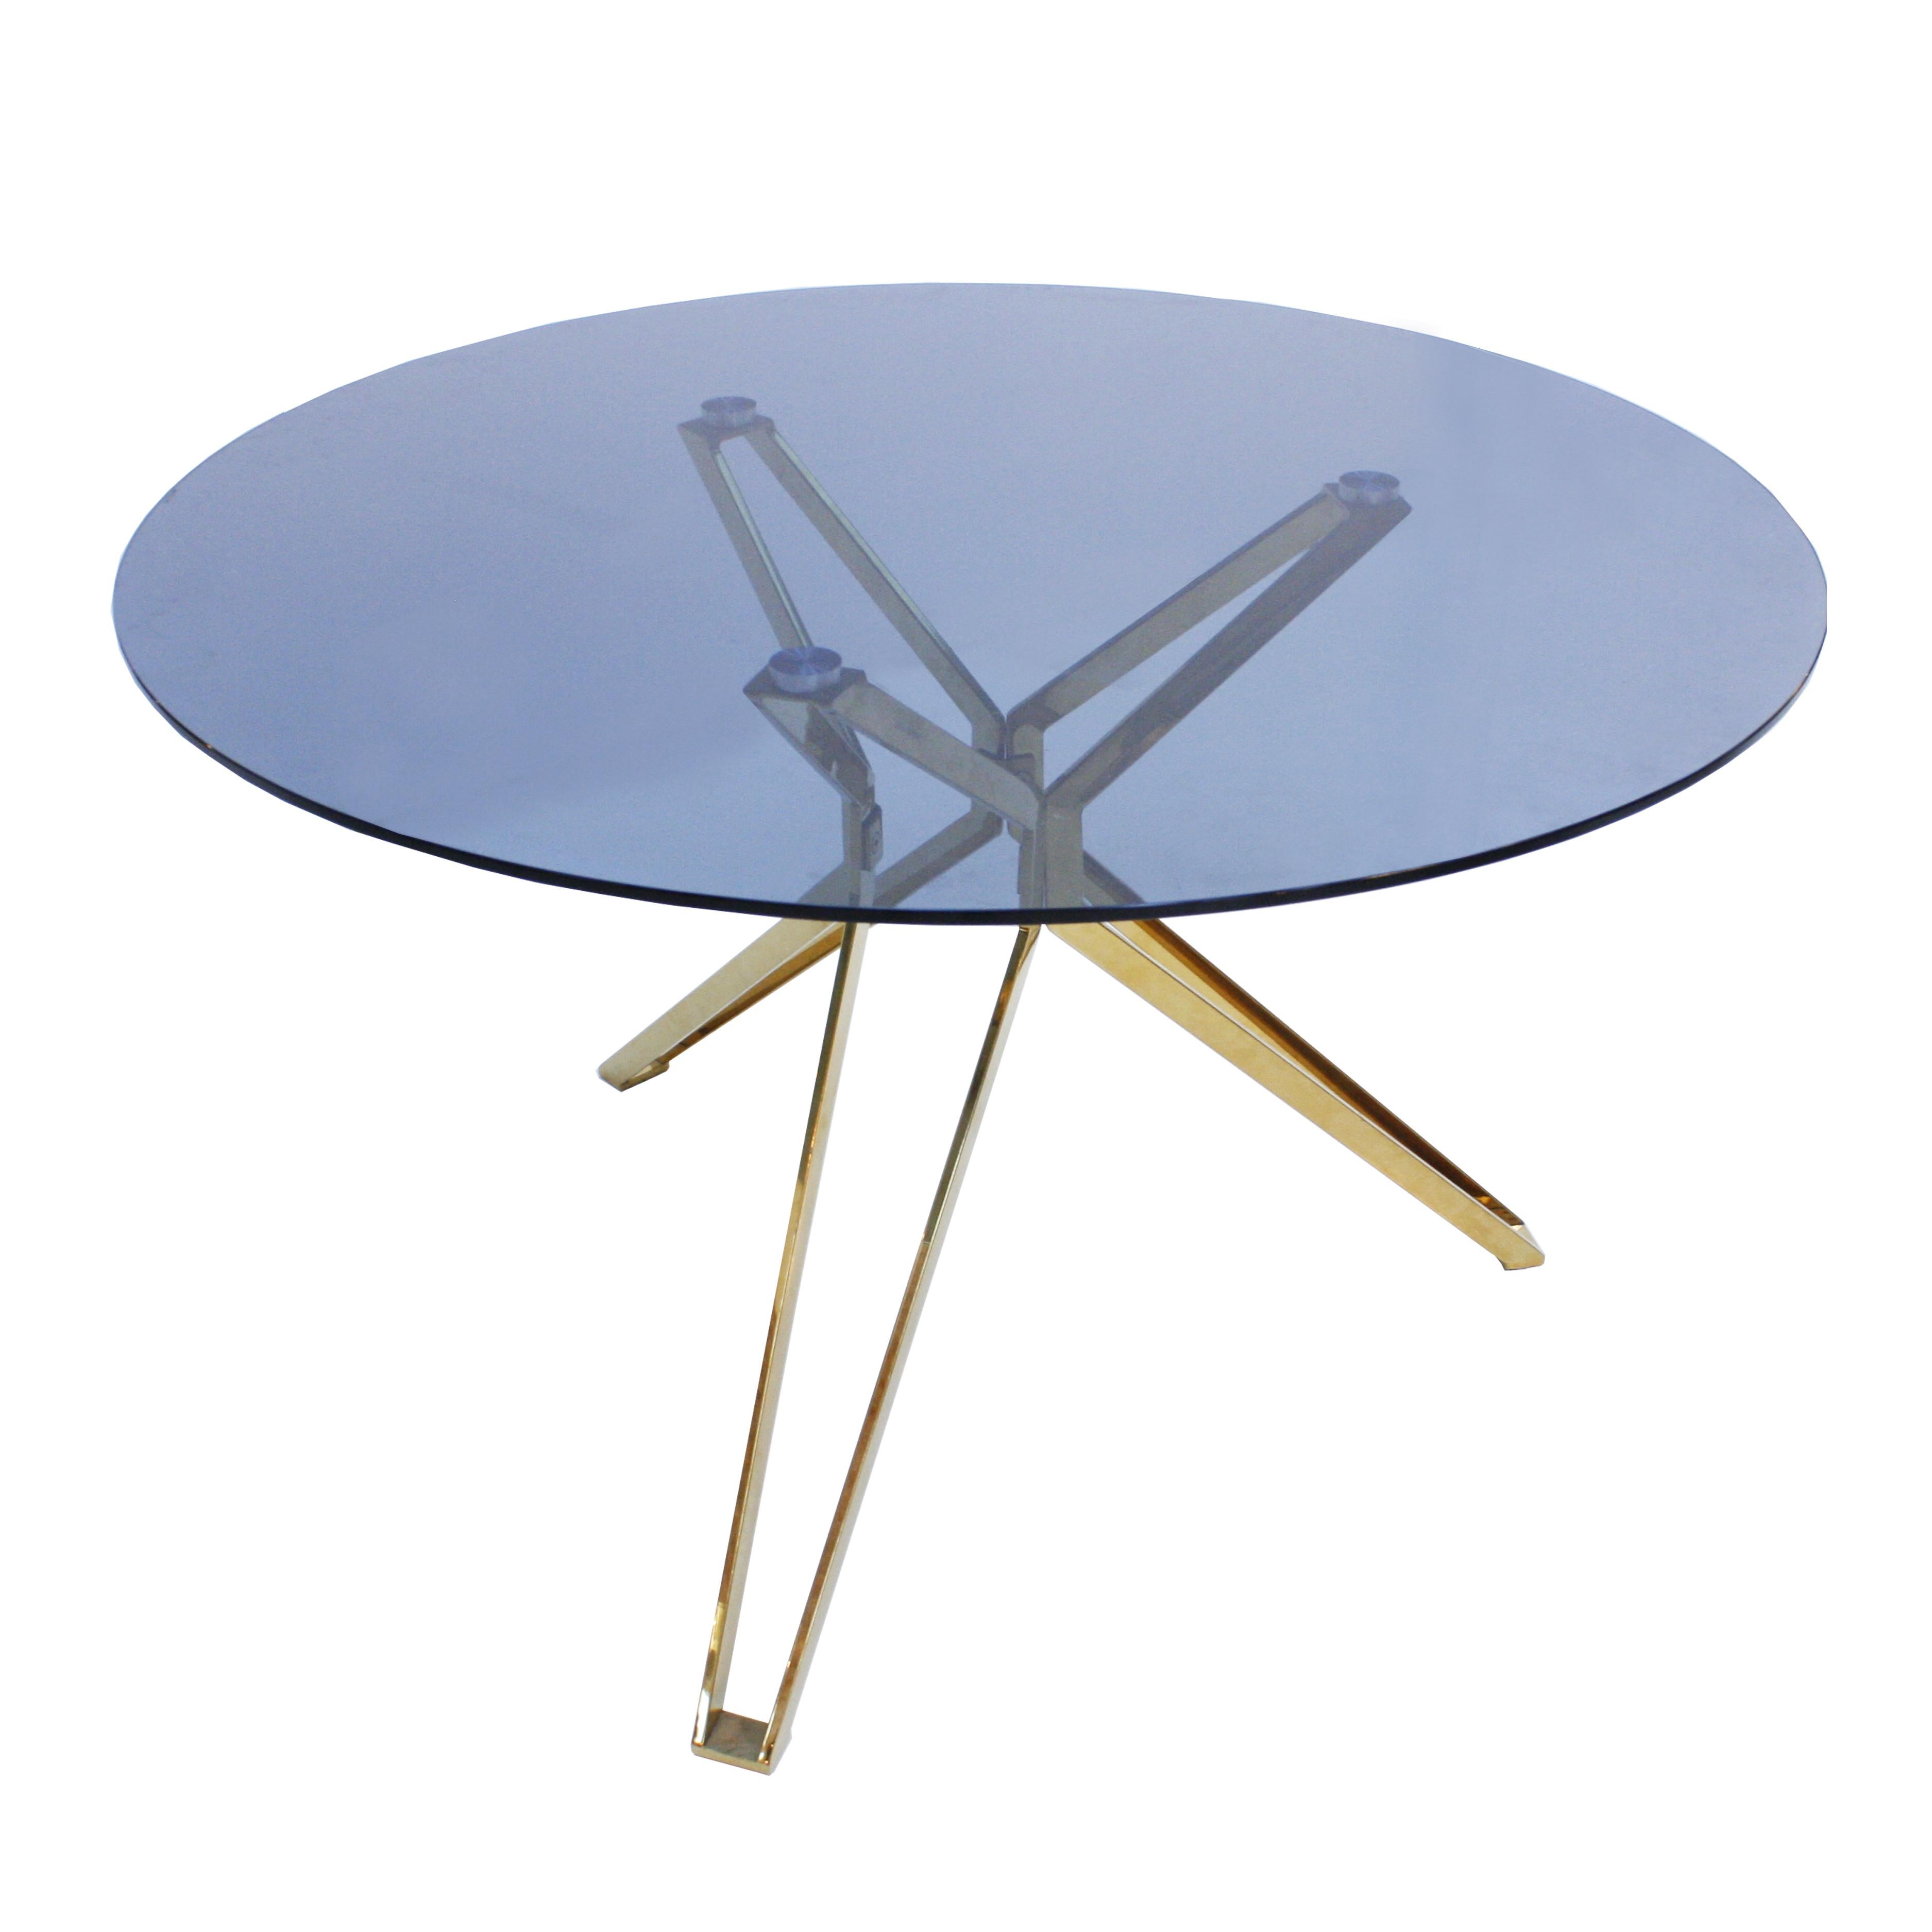 Contemporary circular table. Structure composed of three brass platen shape legs, finished with circular aluminium pieces that support a circular fumé tempered glass top. Made in the Netherlands.

